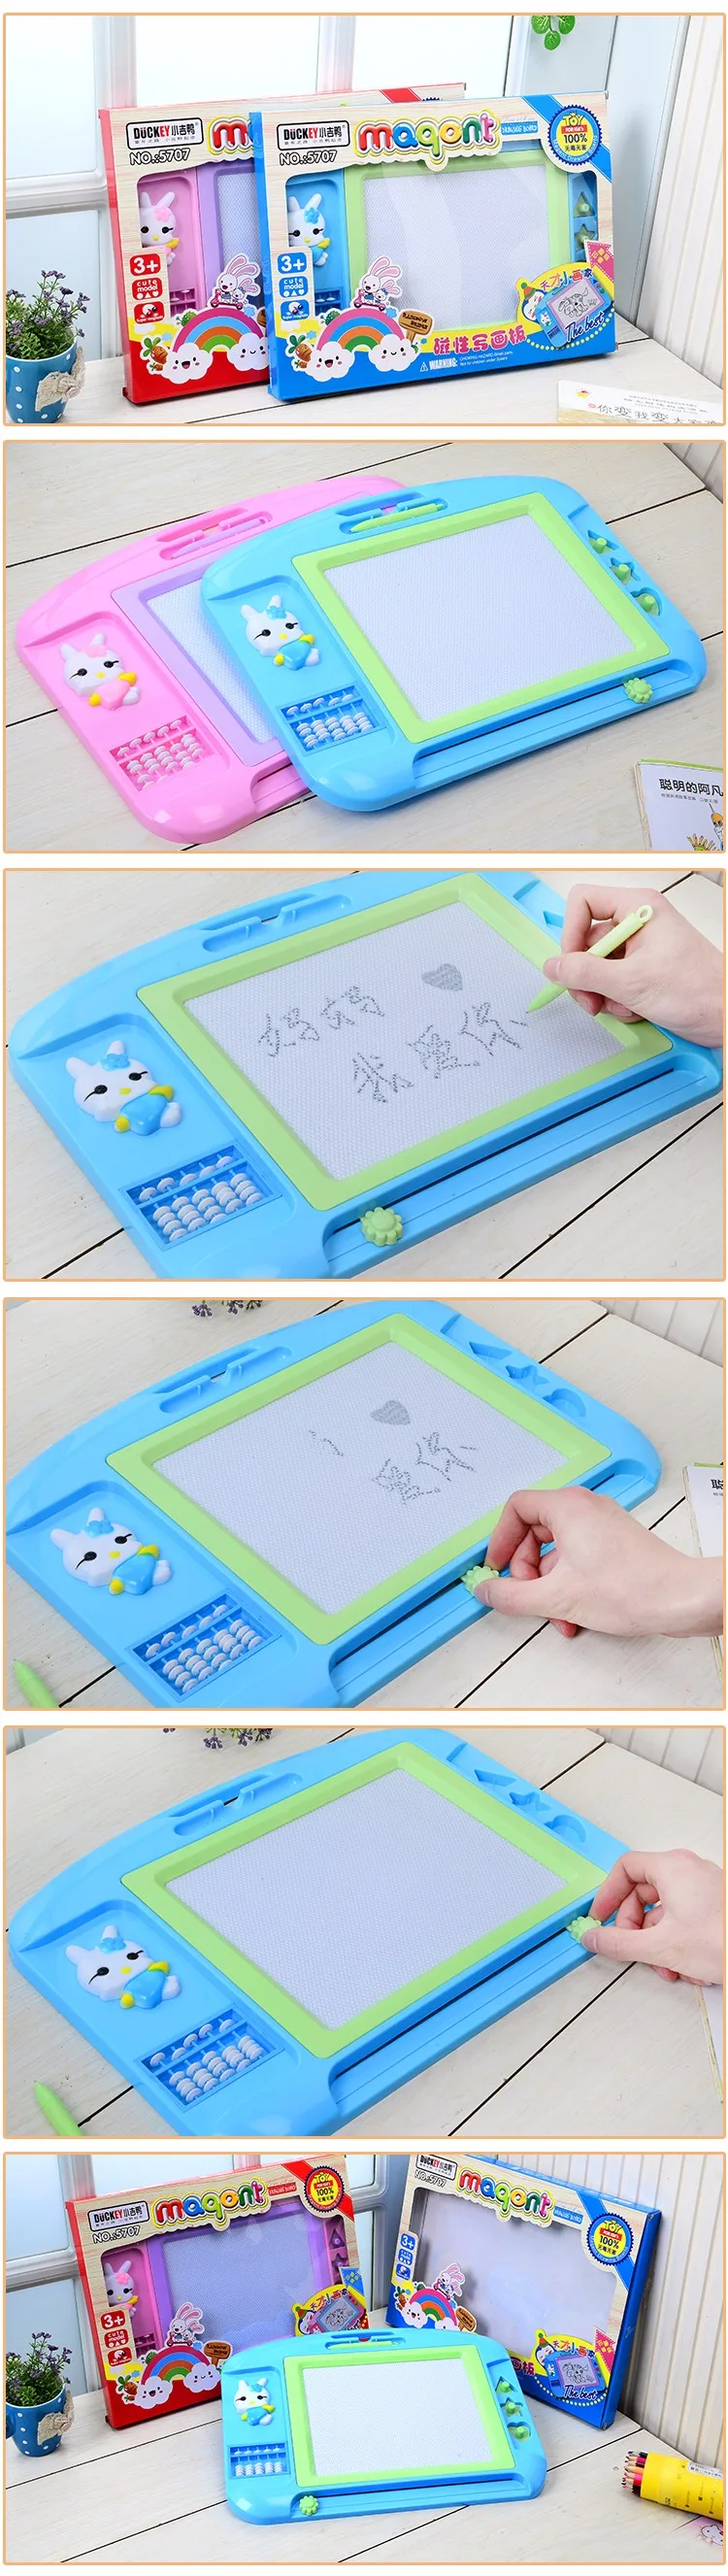 DUCKEY OEM factory price erasable magnetic drawing board for kids